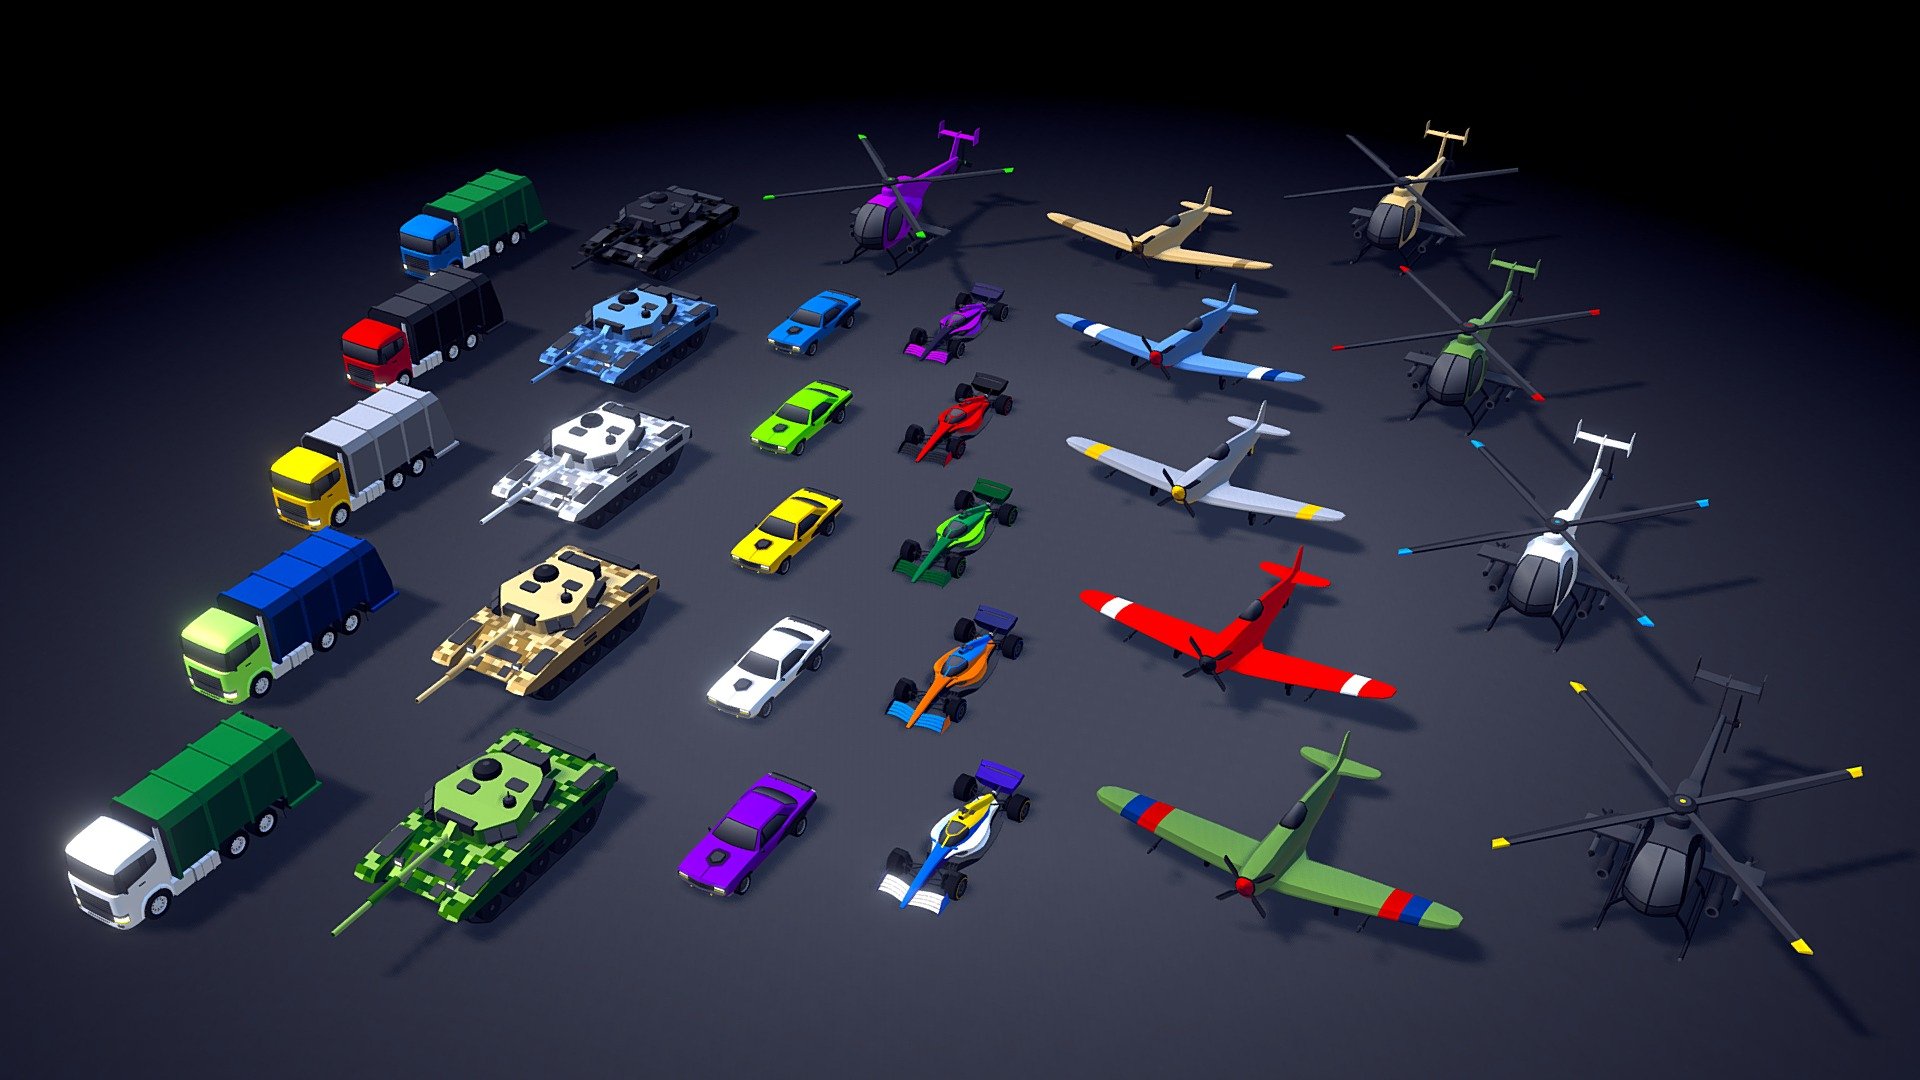 This is the (free) April update of my asset called ARCADE: Ultimate Vehicles Pack. It is now available for download in Unity3D (in the Unity Asset Store) and Sketchfab! (FBX + UNITY Files included).

The update includes 6 new vehicles (racing cars, military vehicles, and more).

Best regards, Mena 3d model